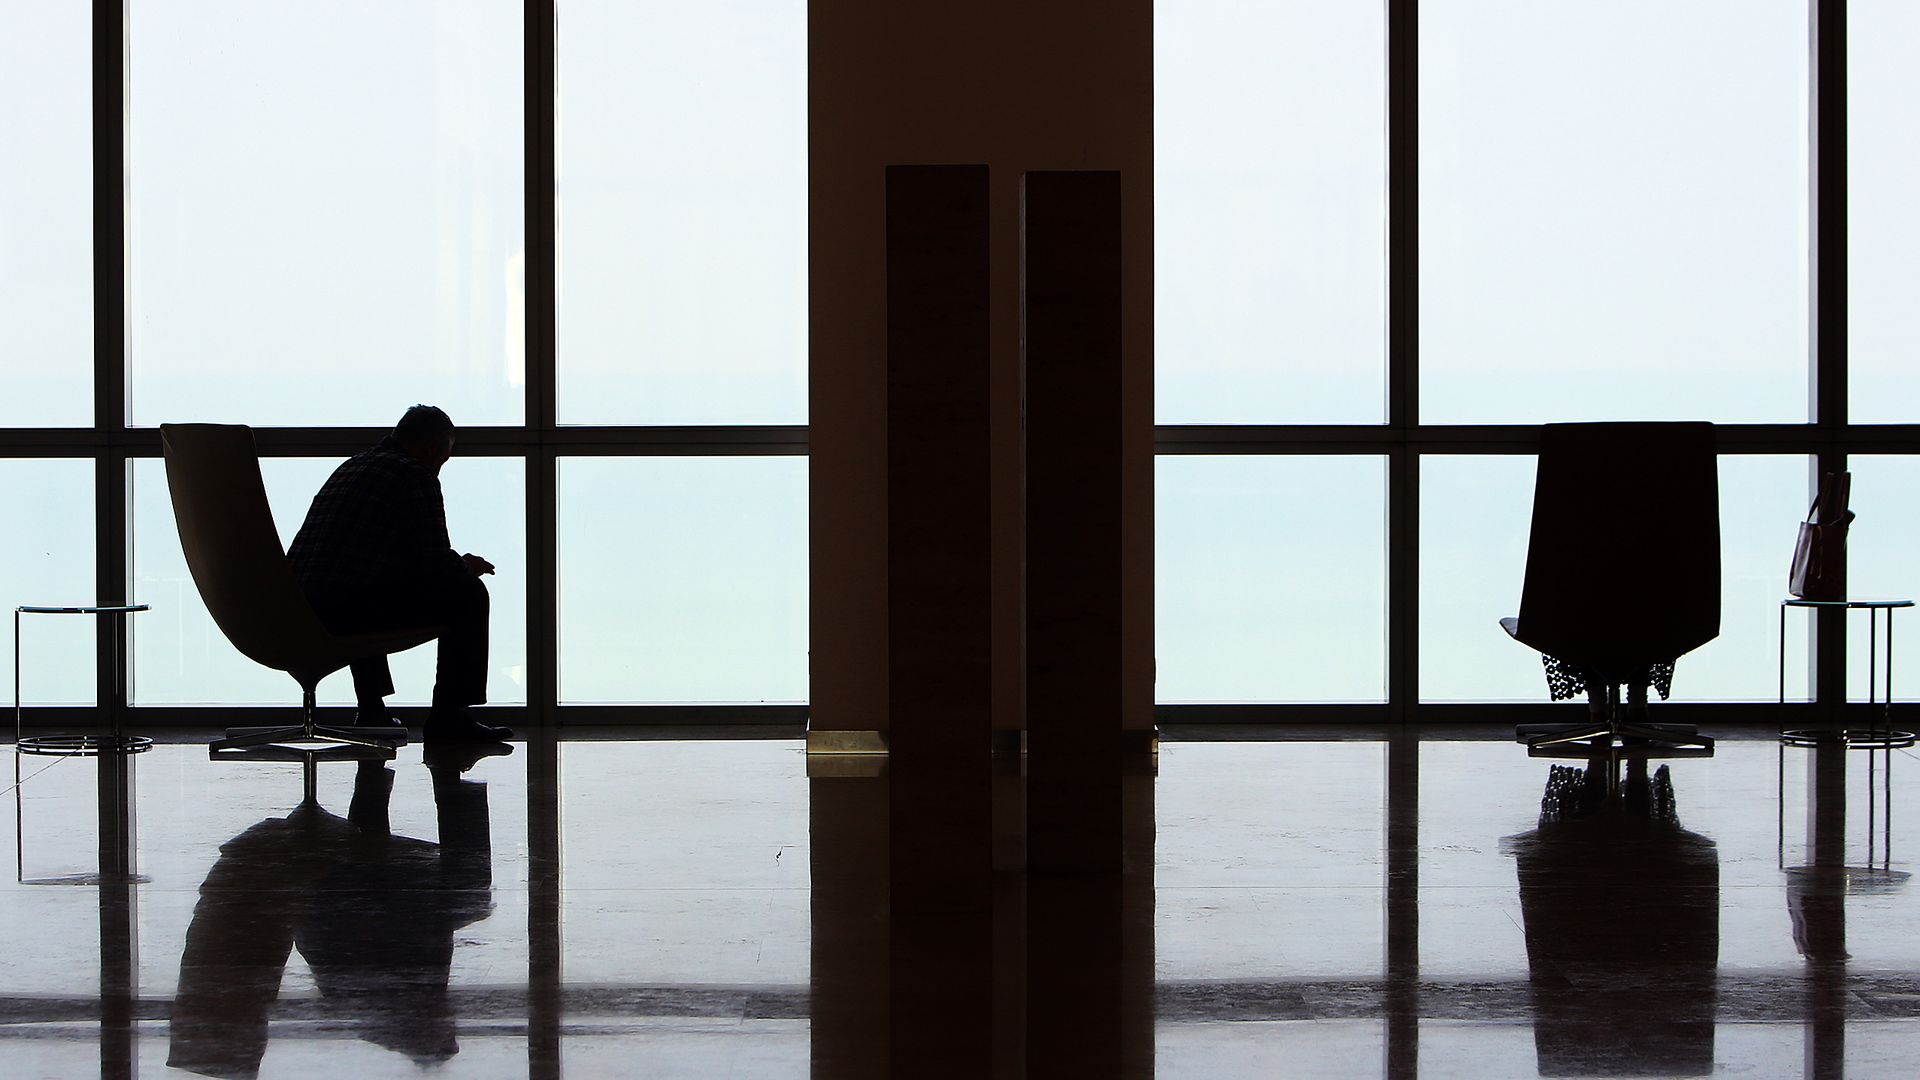 A man sitting alone in a chair looking out the window